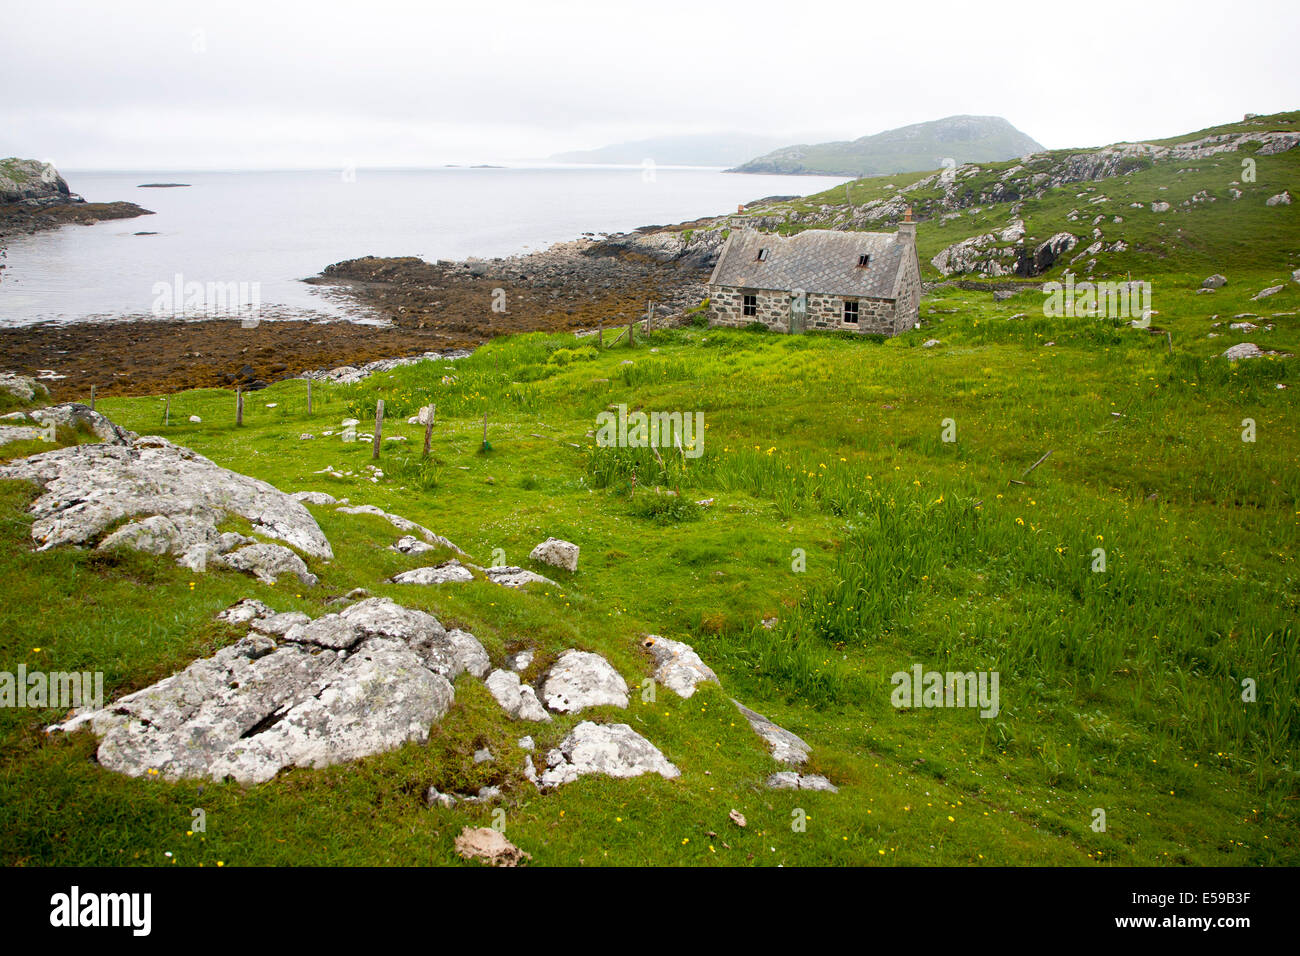 Deserted derelict croft cottage in coastal location at Port Deas an Uidhe, Vatersay Island, Barra, Outer, Hebrides, Scotland Stock Photo